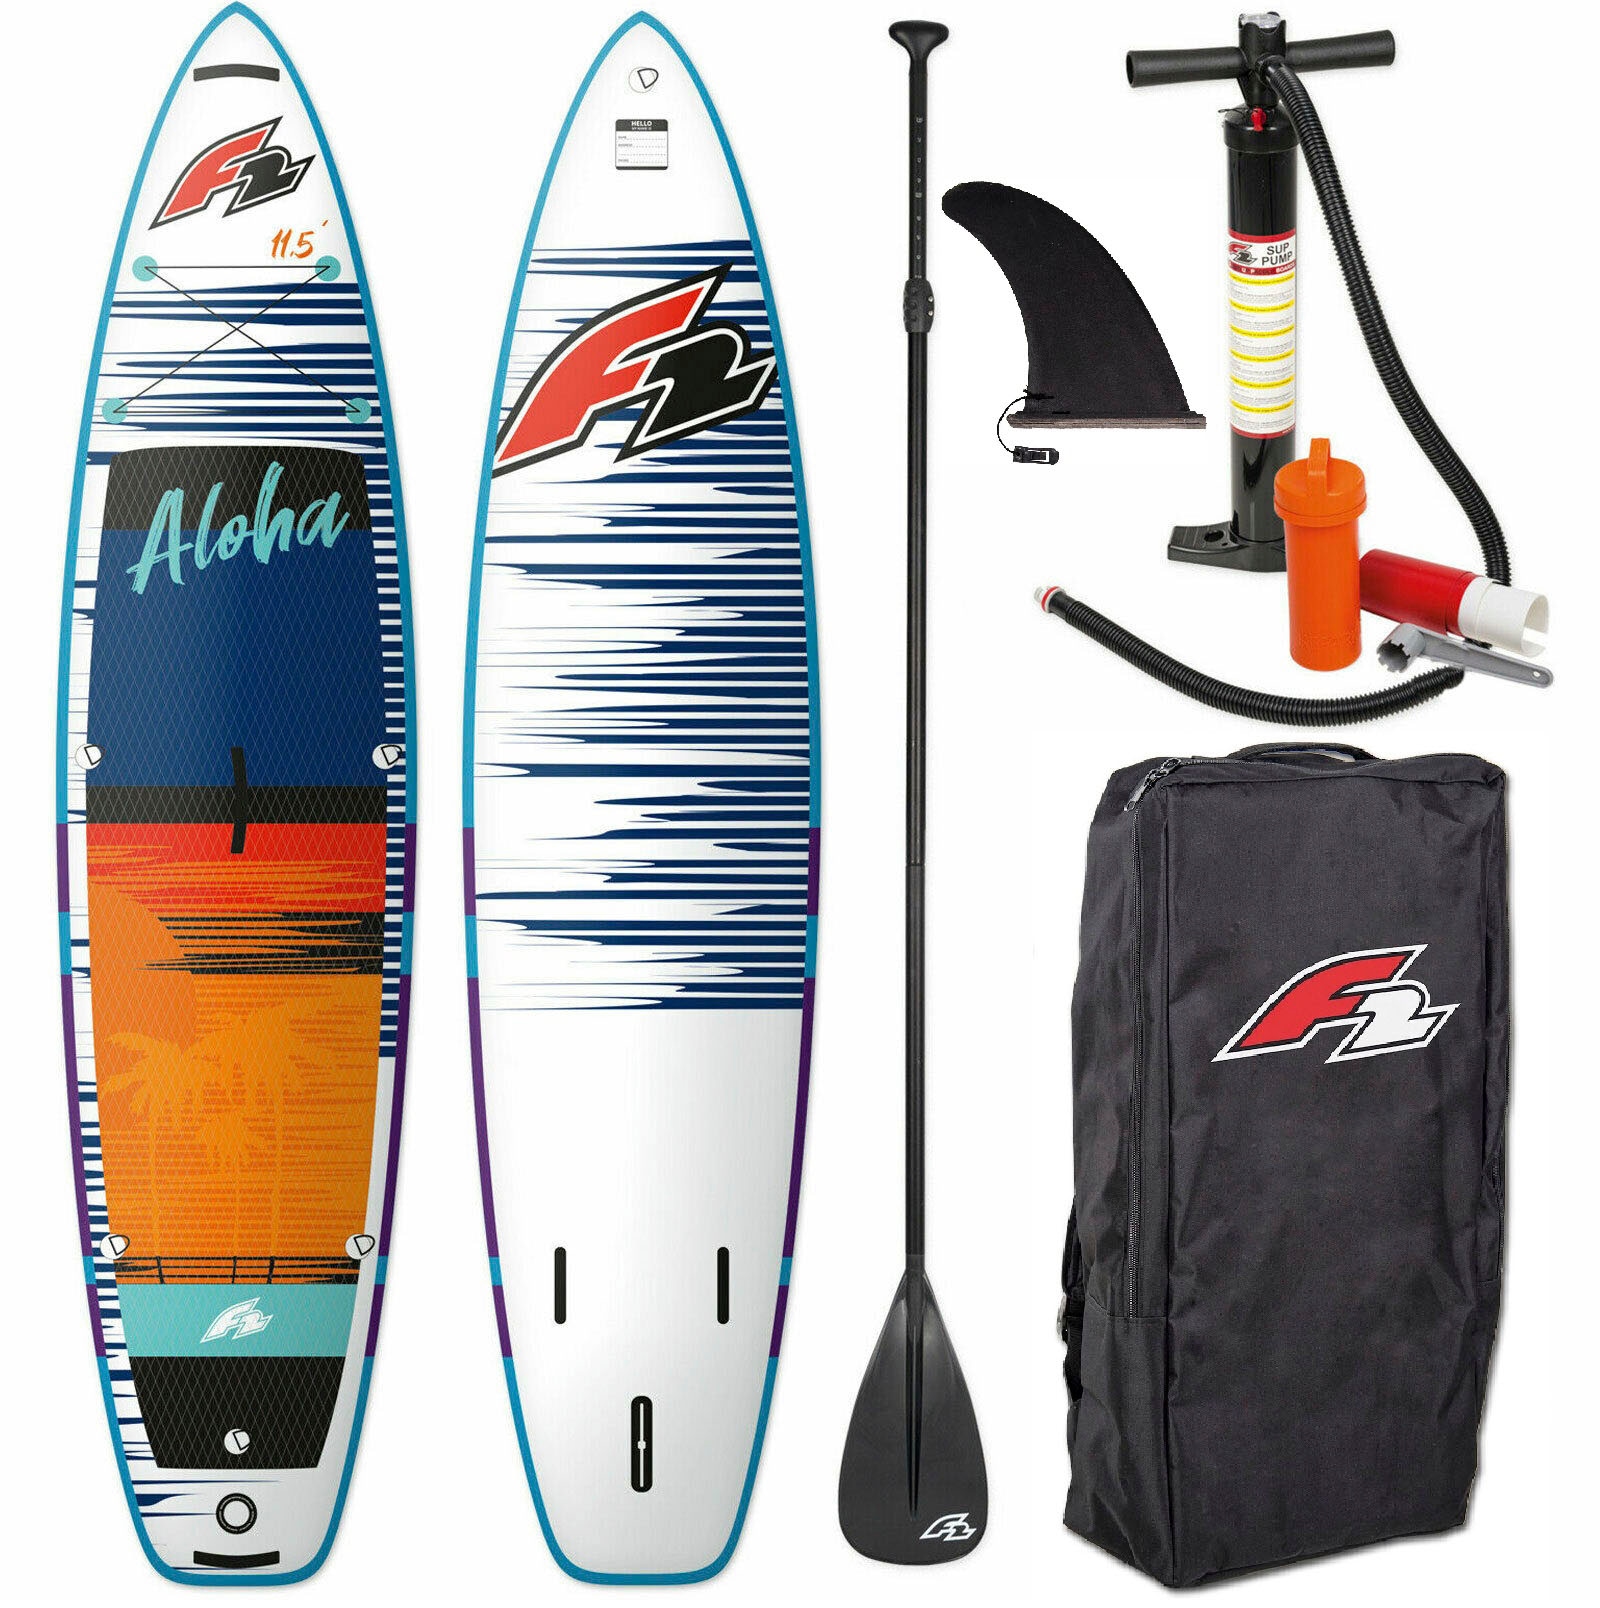 F2 Inflatable Online red«, (Packung, »Aloha Shop 5 OTTO tlg.) 11,4 im kaufen SUP-Board